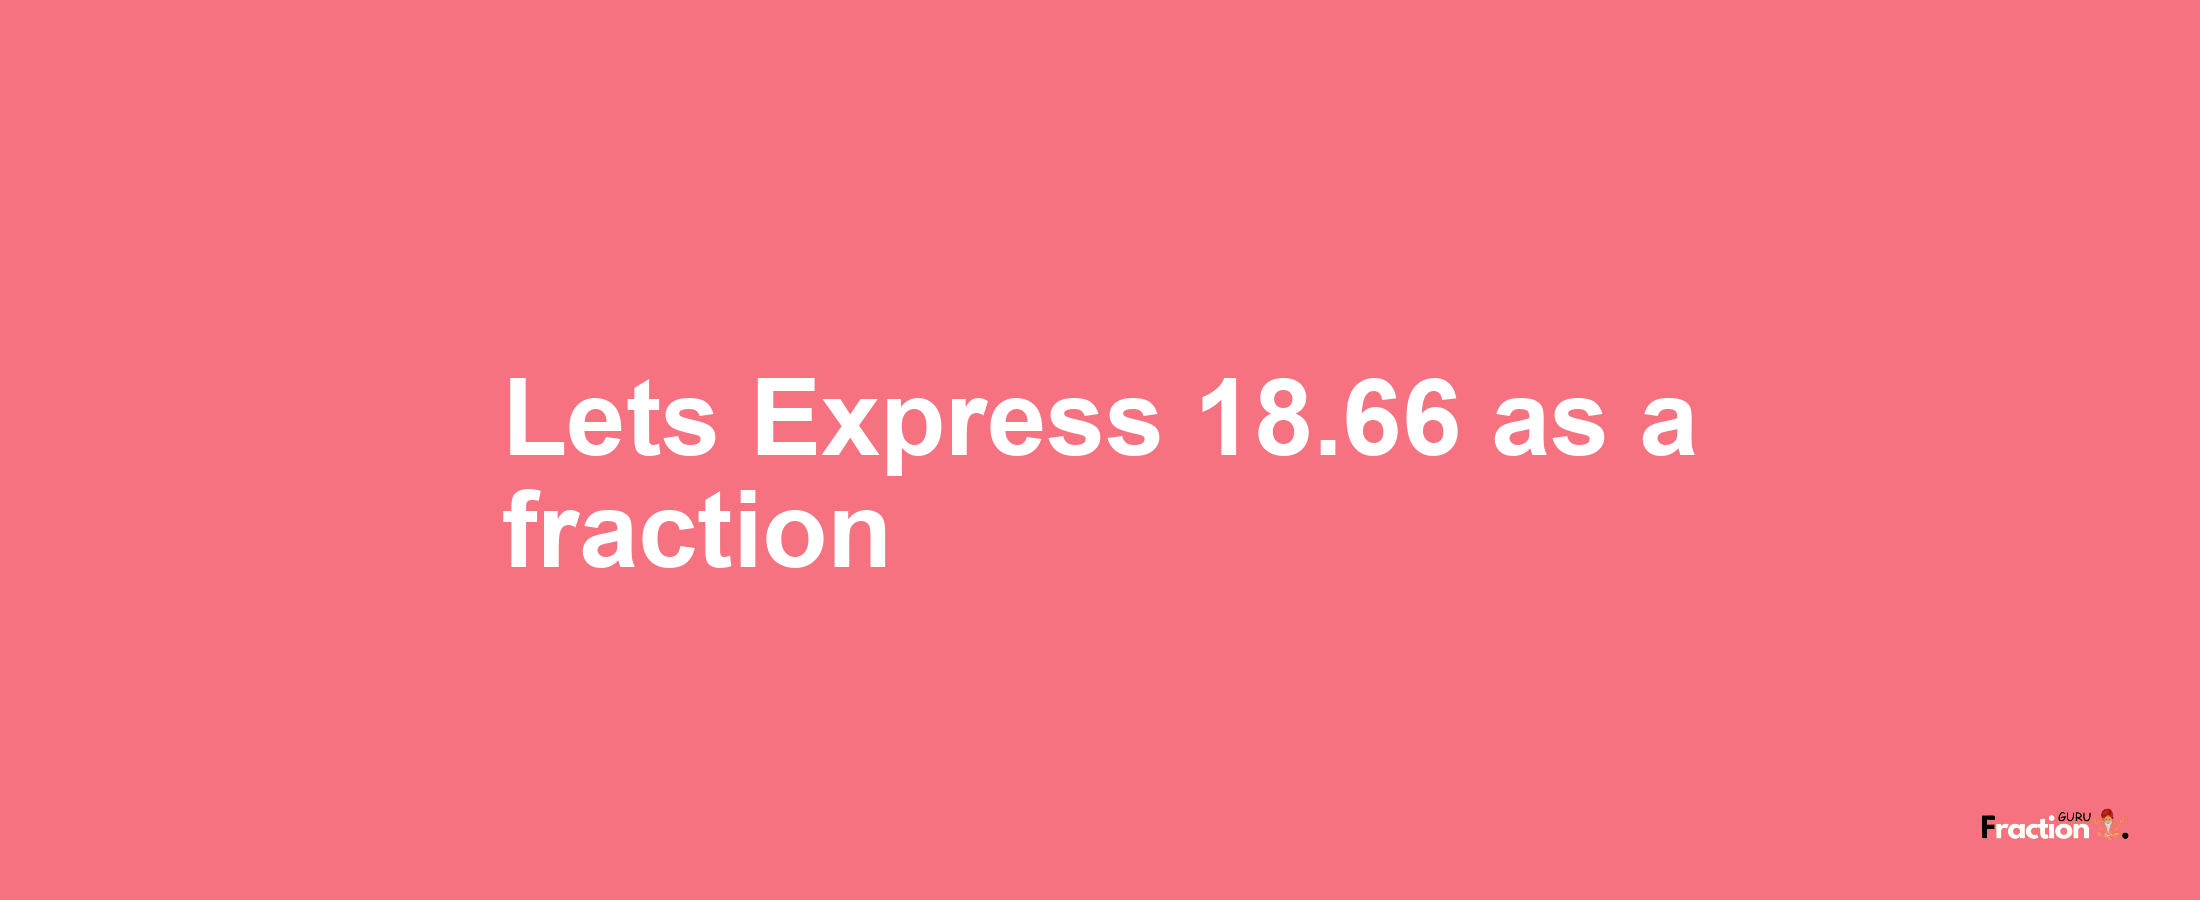 Lets Express 18.66 as afraction